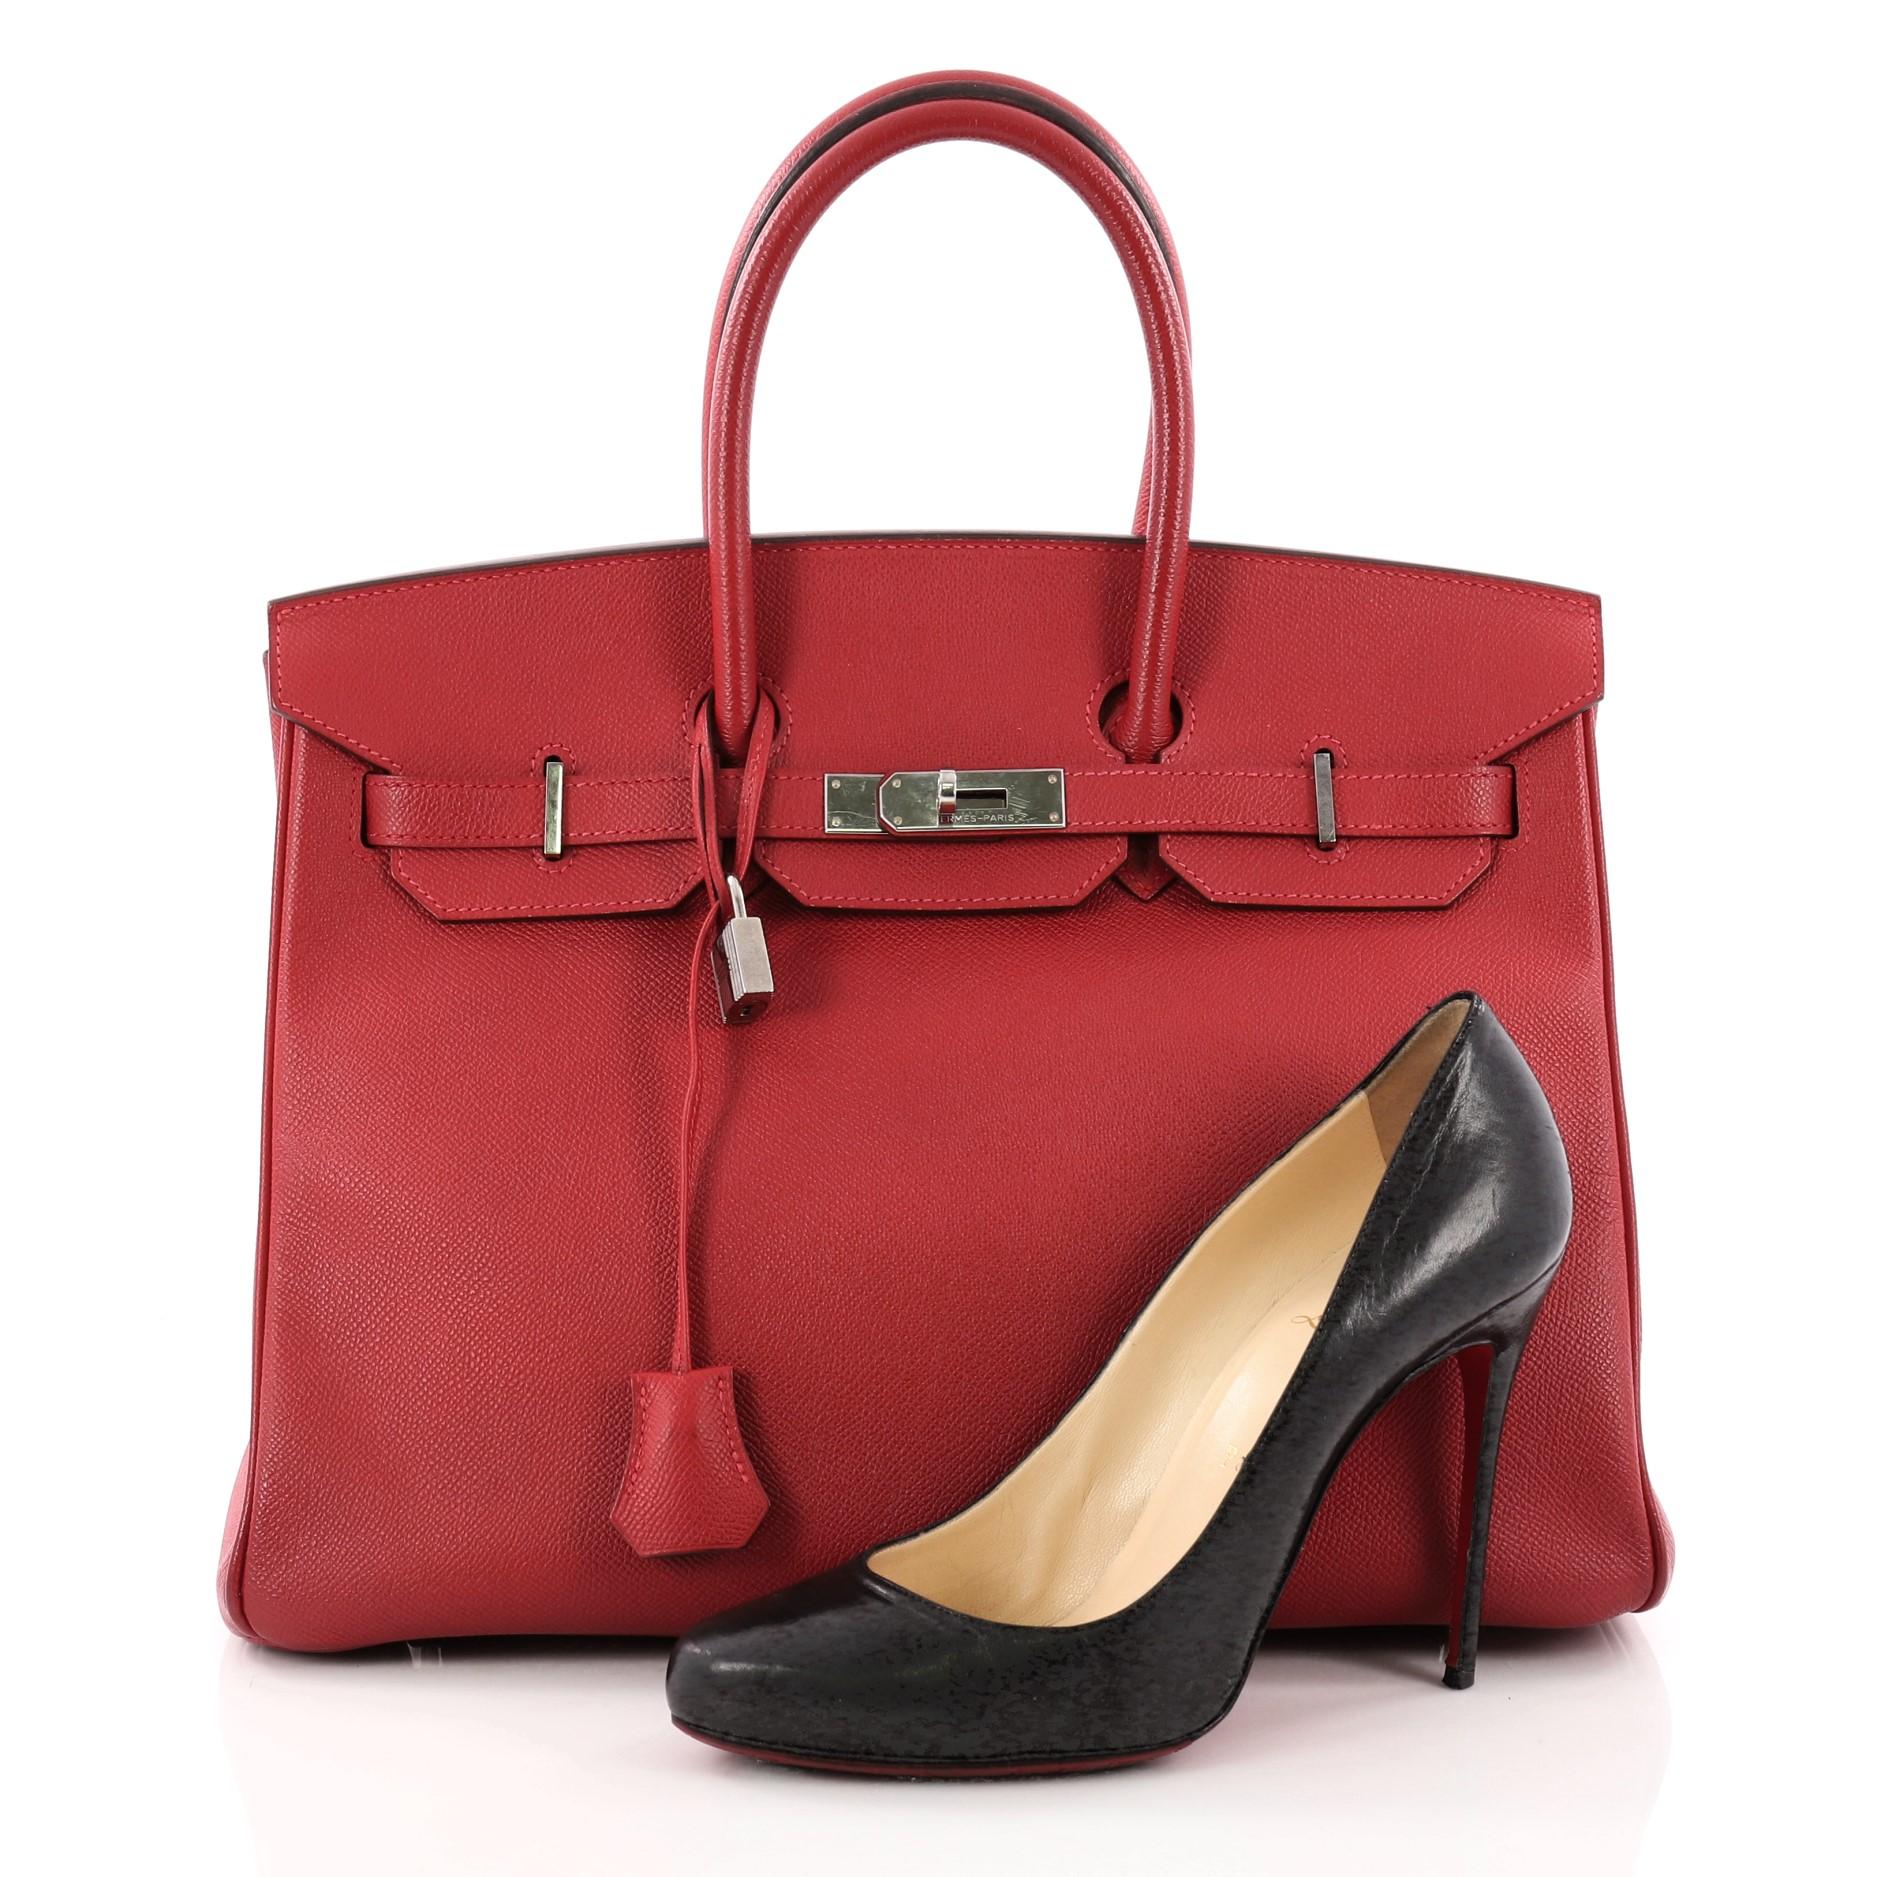 This authentic Hermes Birkin Handbag Rouge Casaque Epsom with Palladium Hardware 35 stands as one of the most-coveted and timeless bags fit for any fashionista. Constructed from scratch-resistant Rouge Casaque Red Epsom leather, this subtly sleek